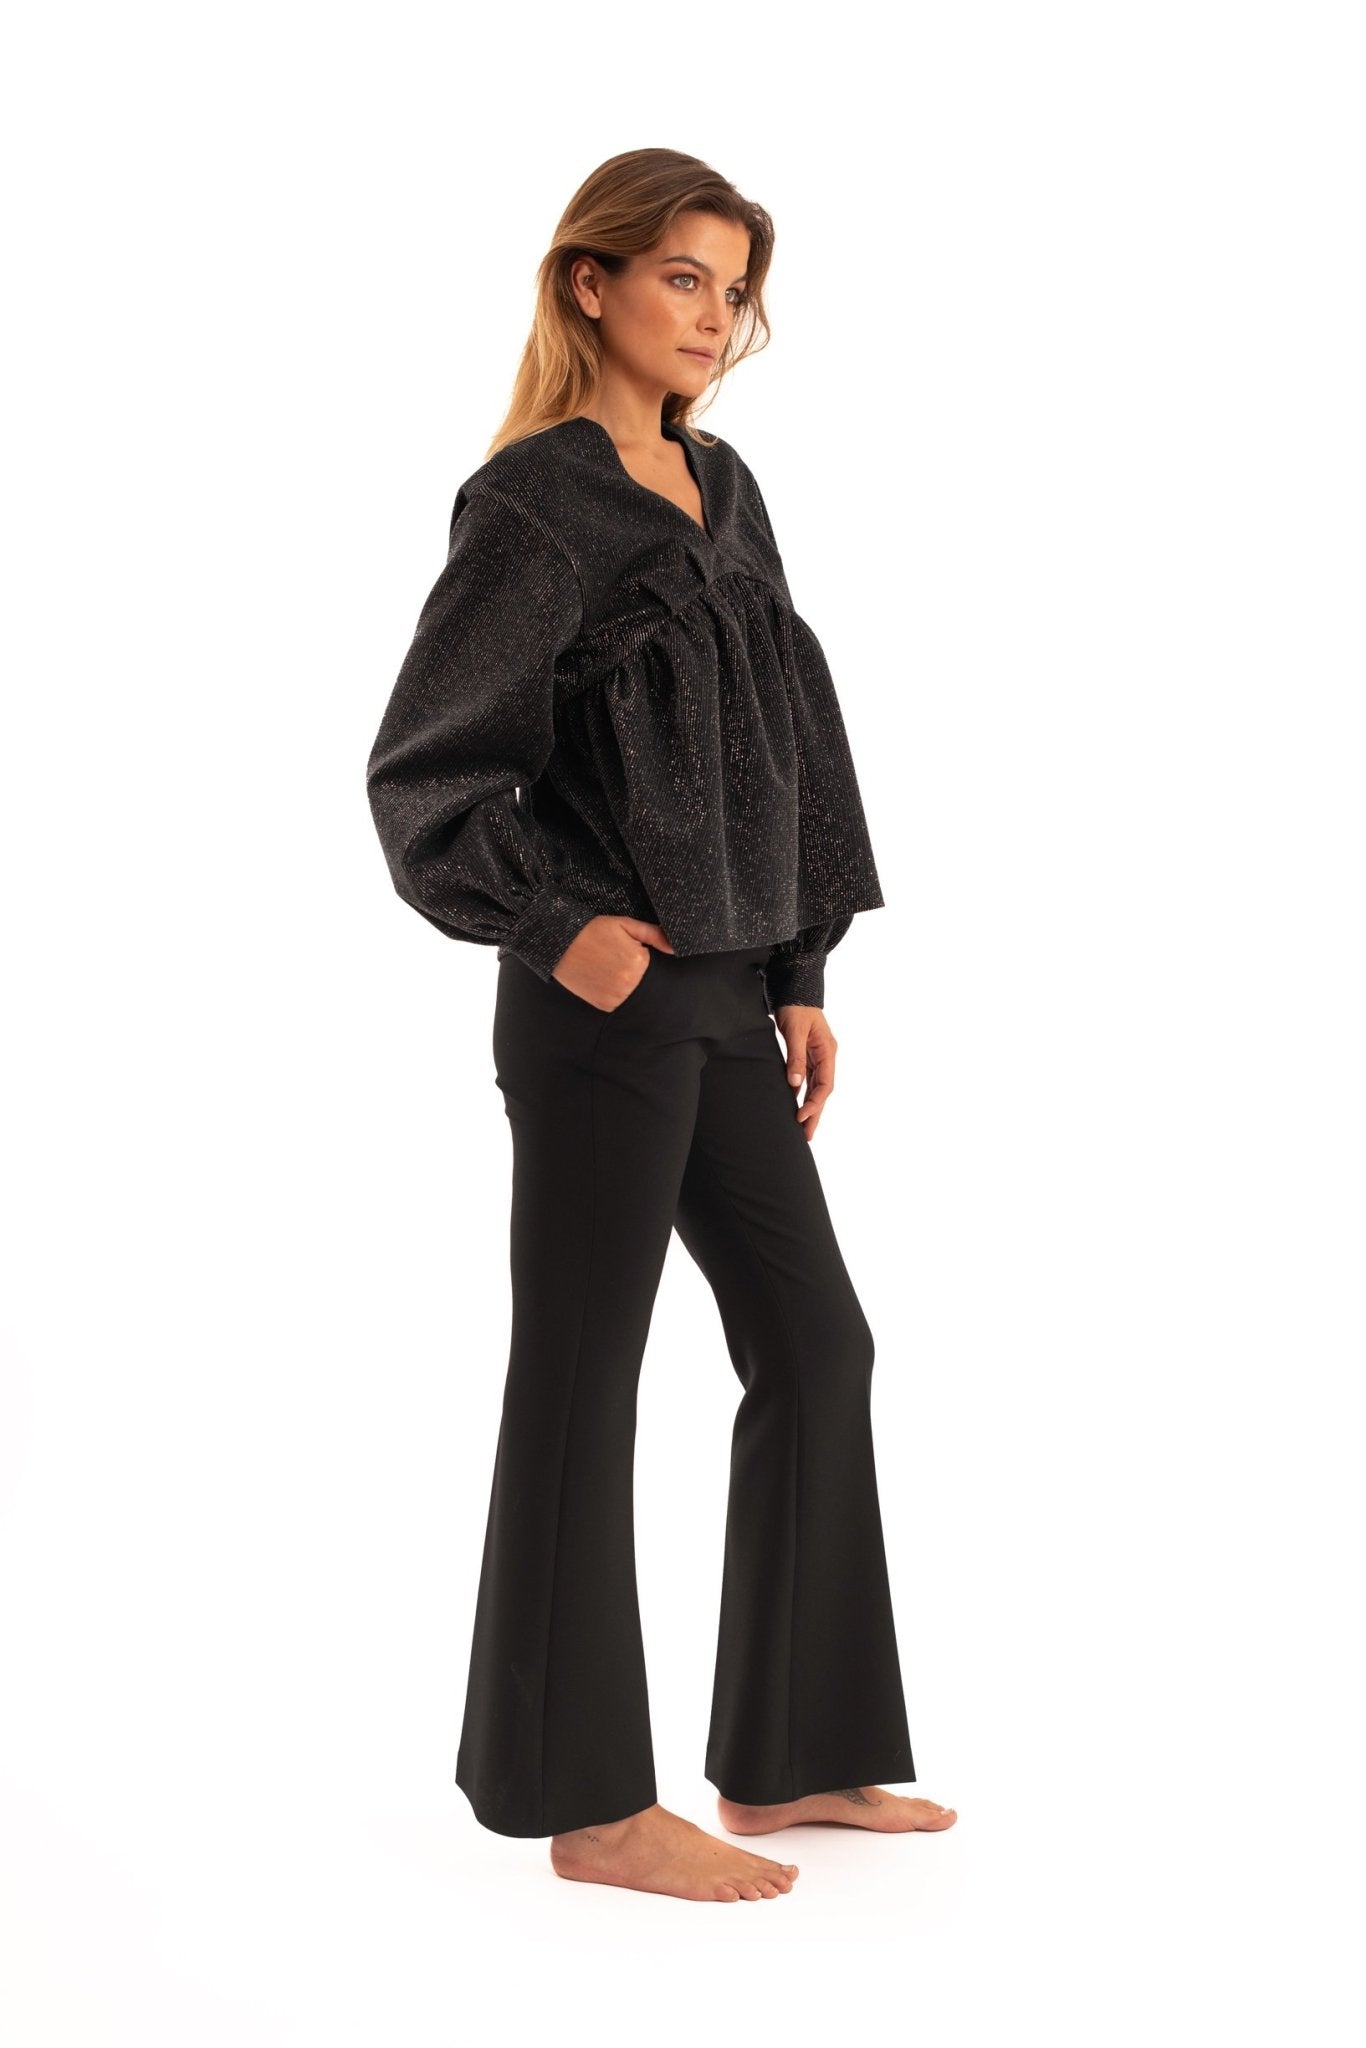 Black Flare Pants - The Clothing LoungeNOPIN